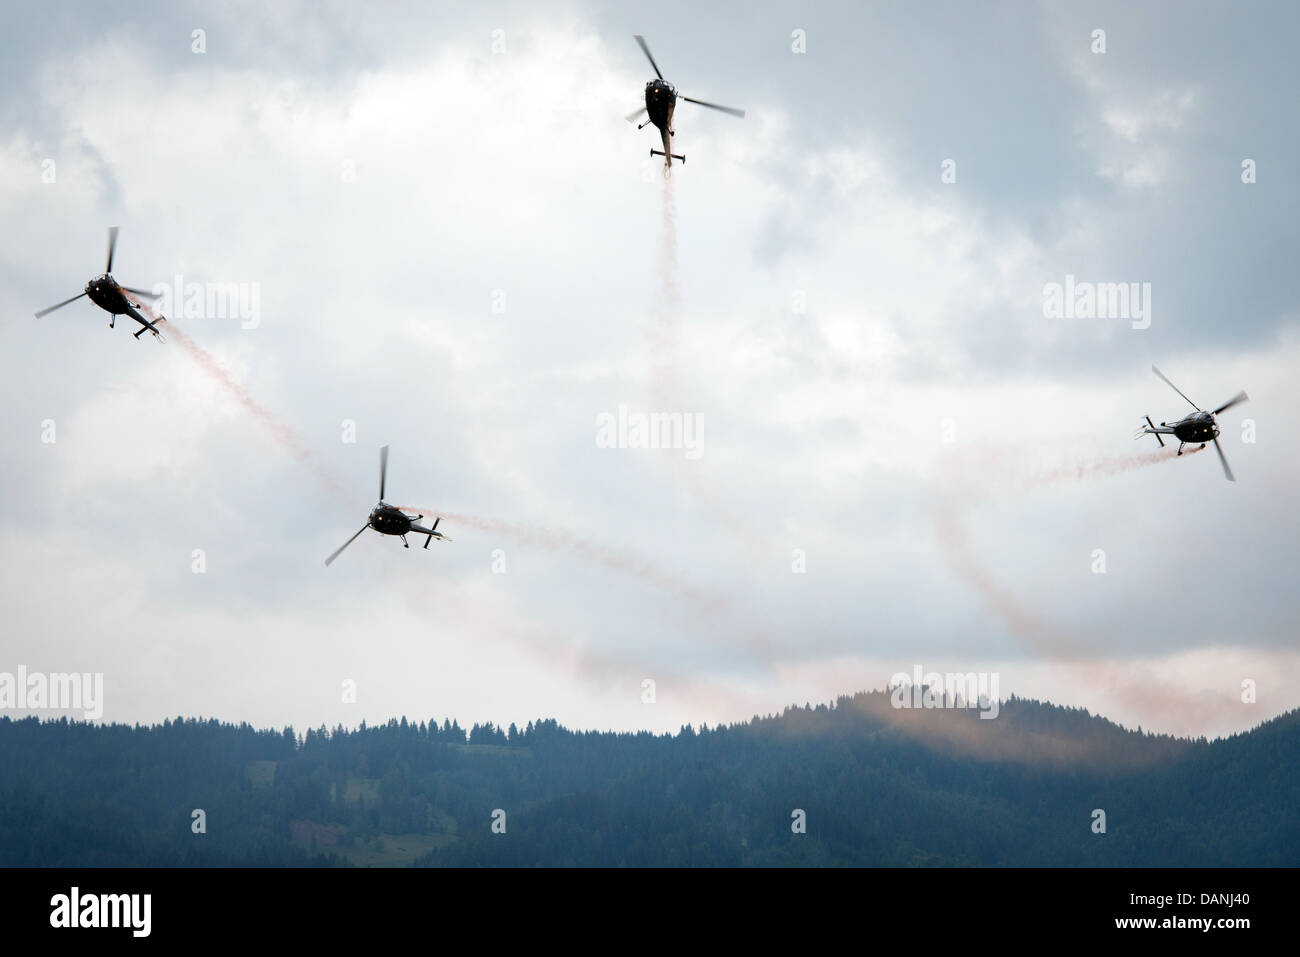 Dynamic pershow of four Austrian helicopters at Airpower 2013 airshow in Zeltweg, Austria, June 28, 2013 Stock Photo